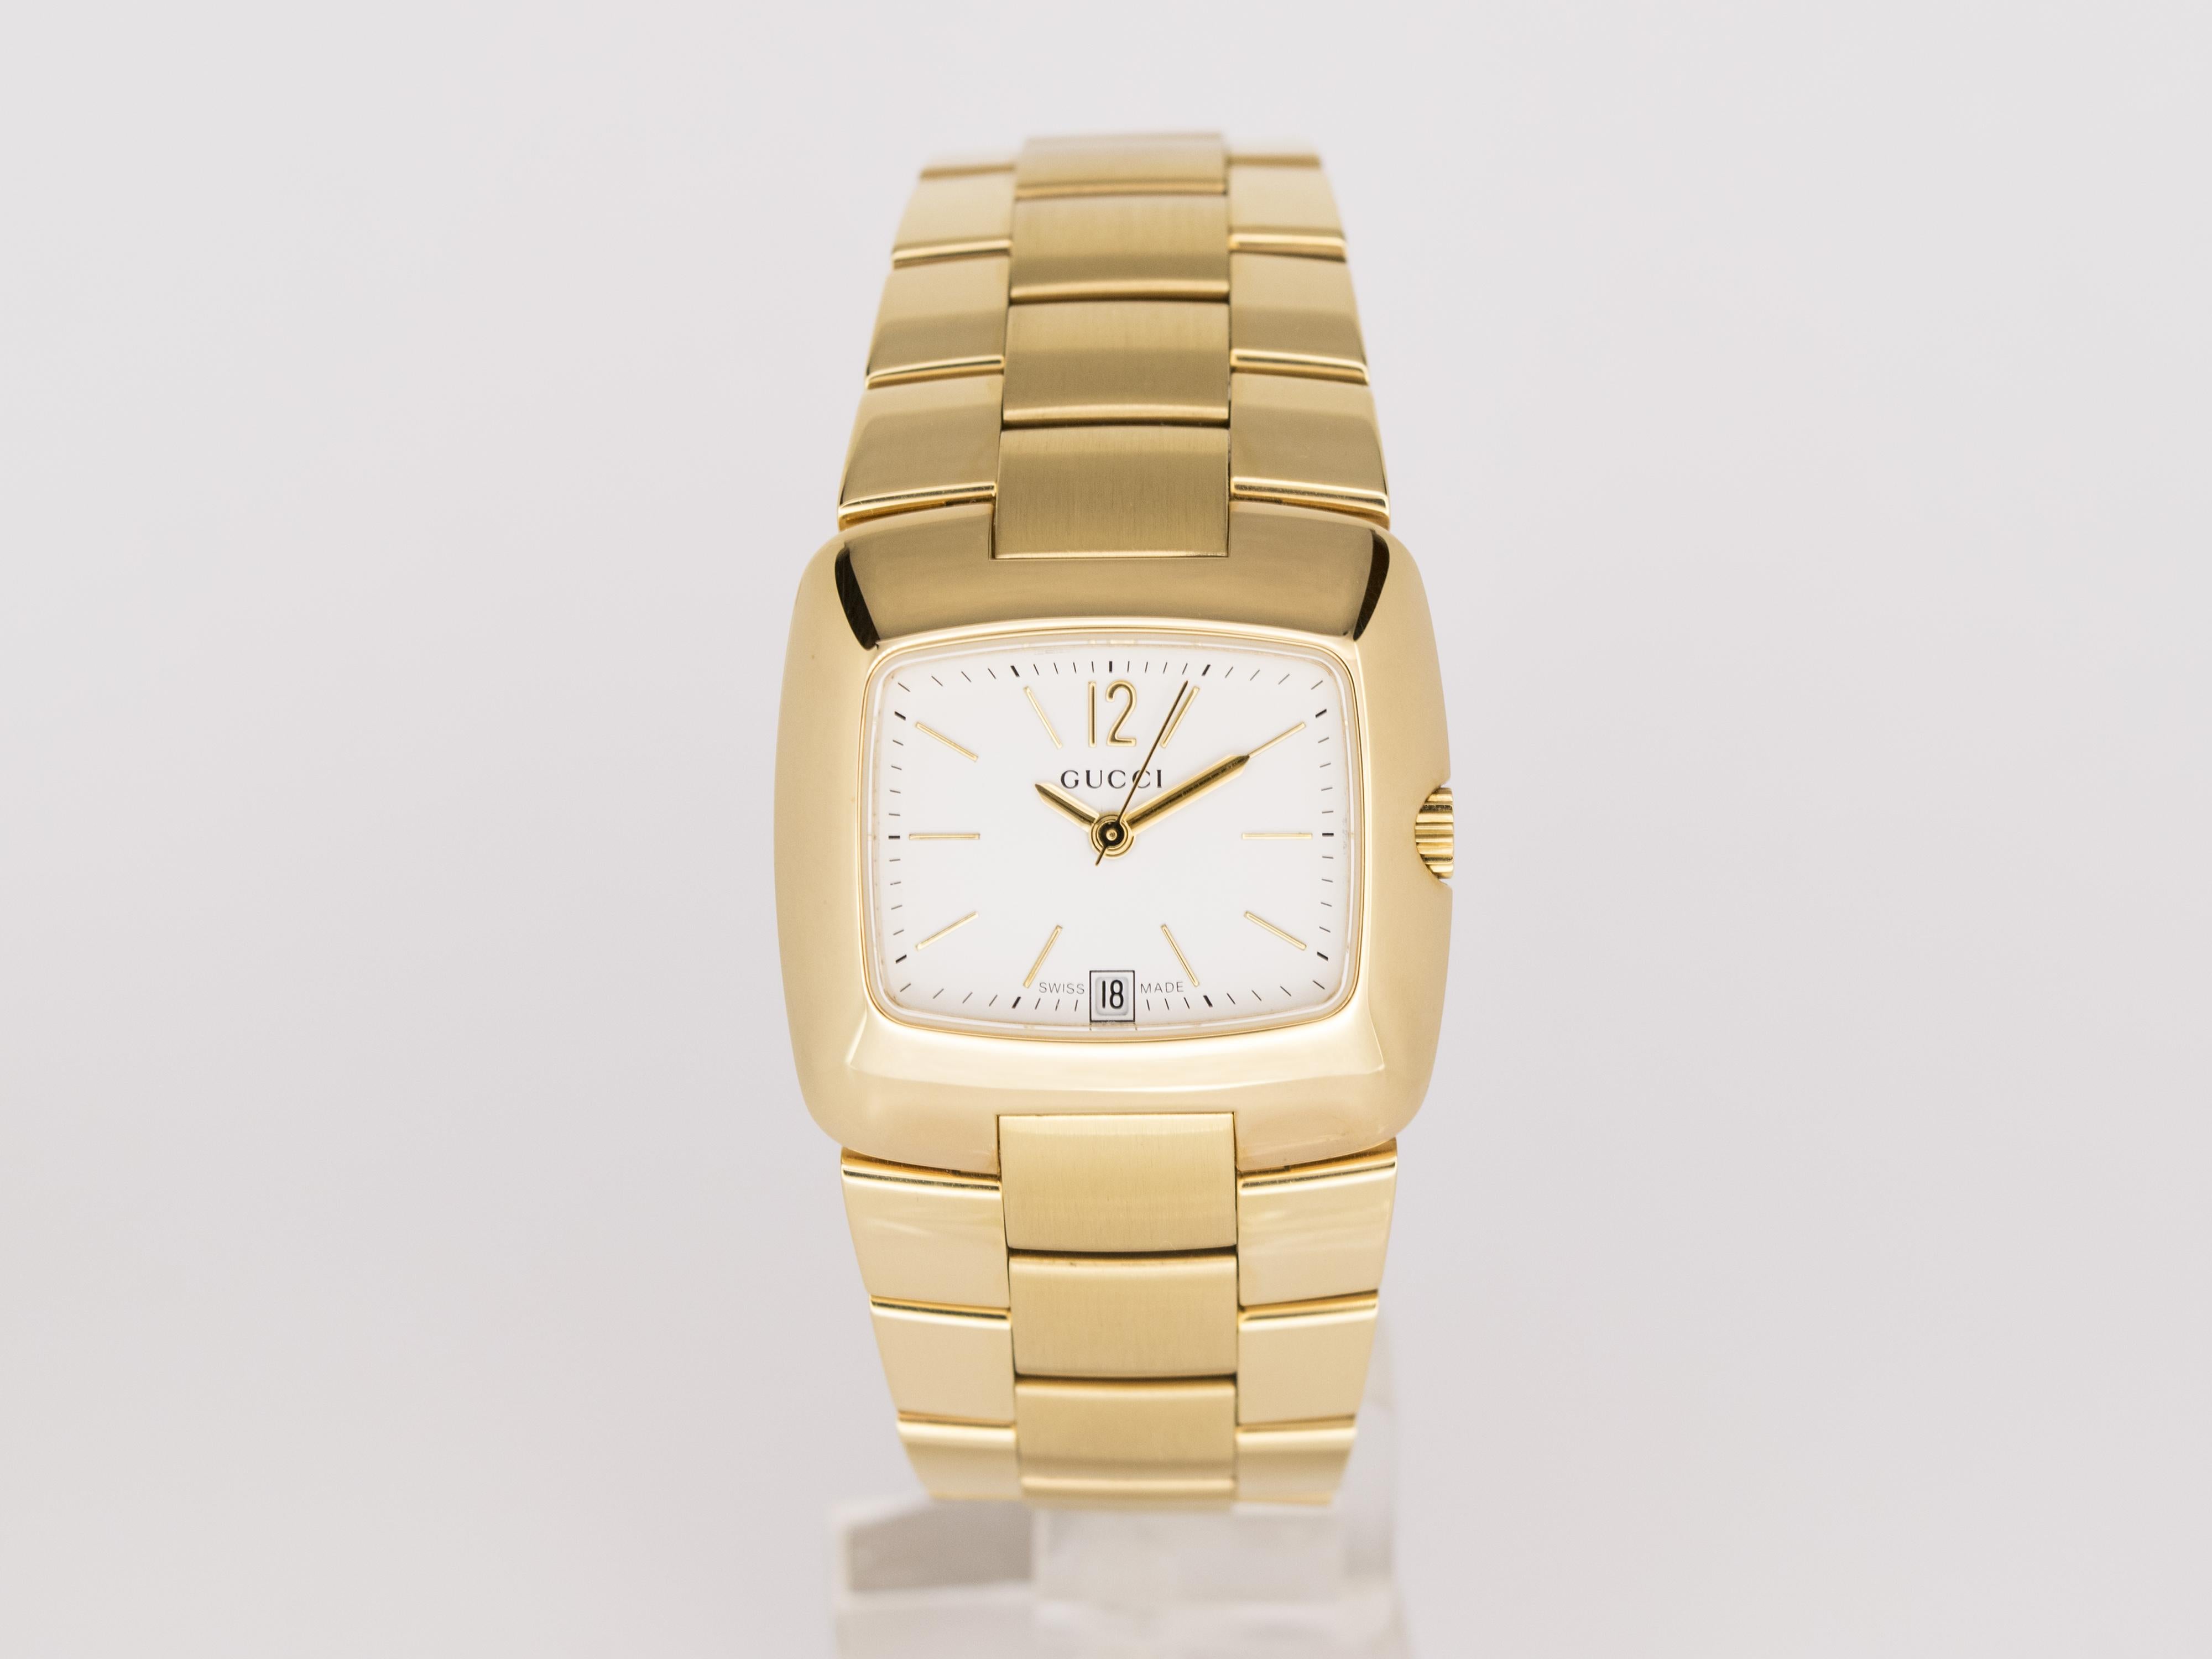 NEW Gucci gold-plated lady quartz watch Swiss Made.
The watch was never worn and cames from an Italian authorized dealer with box and international warranty.

It fit a squared white dial with golden index and it has got the date window at 6